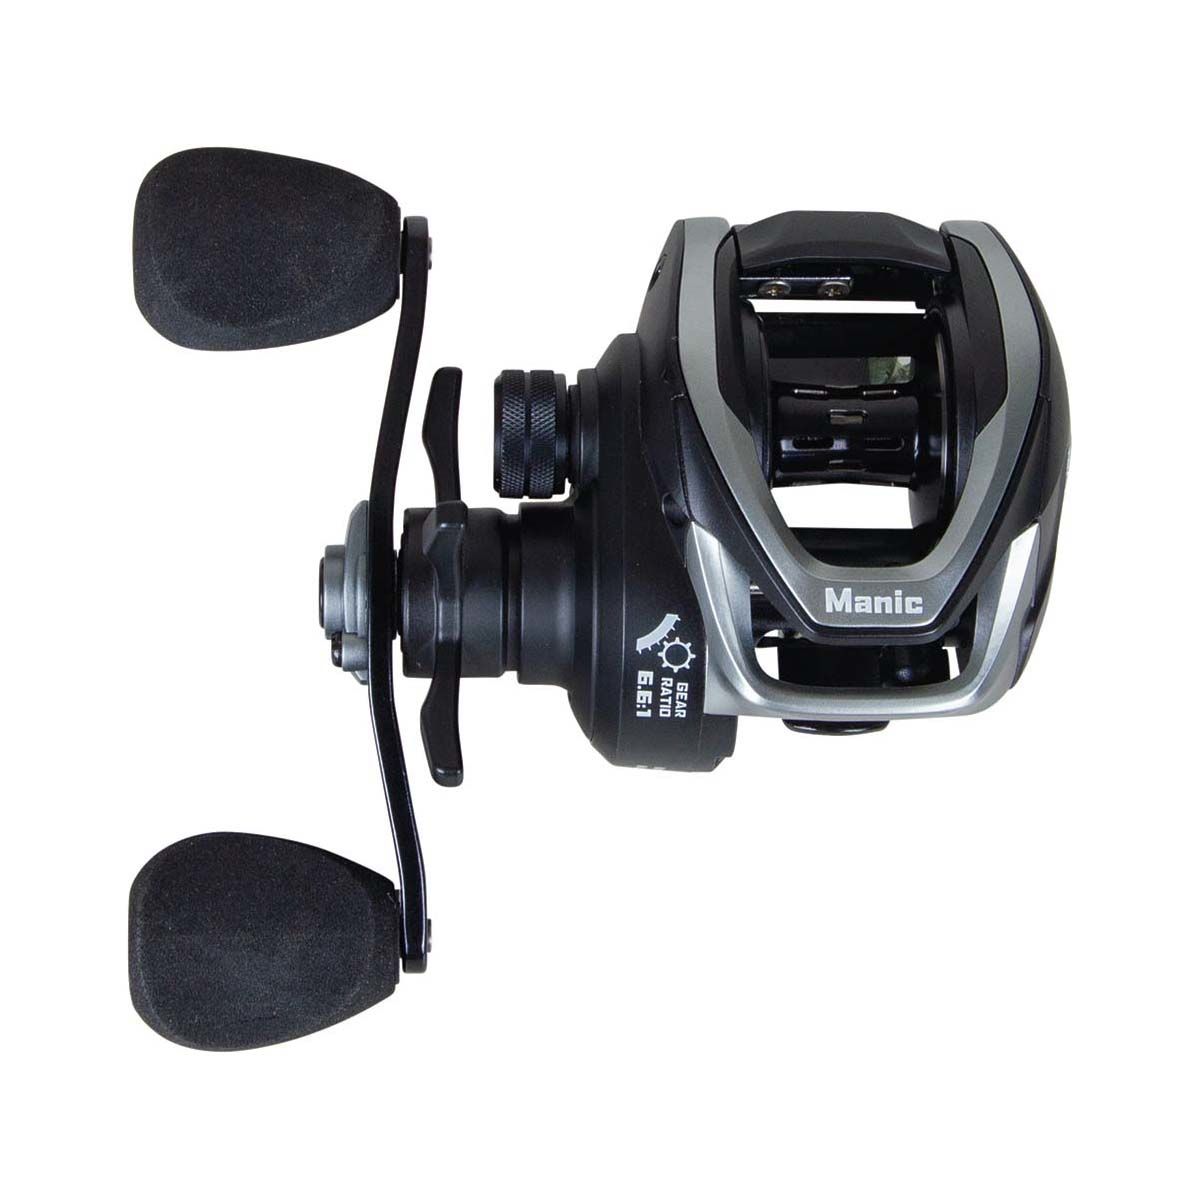 Cheap Savage Manic 200 Baitcaster Reel with Reviews - Groupspree